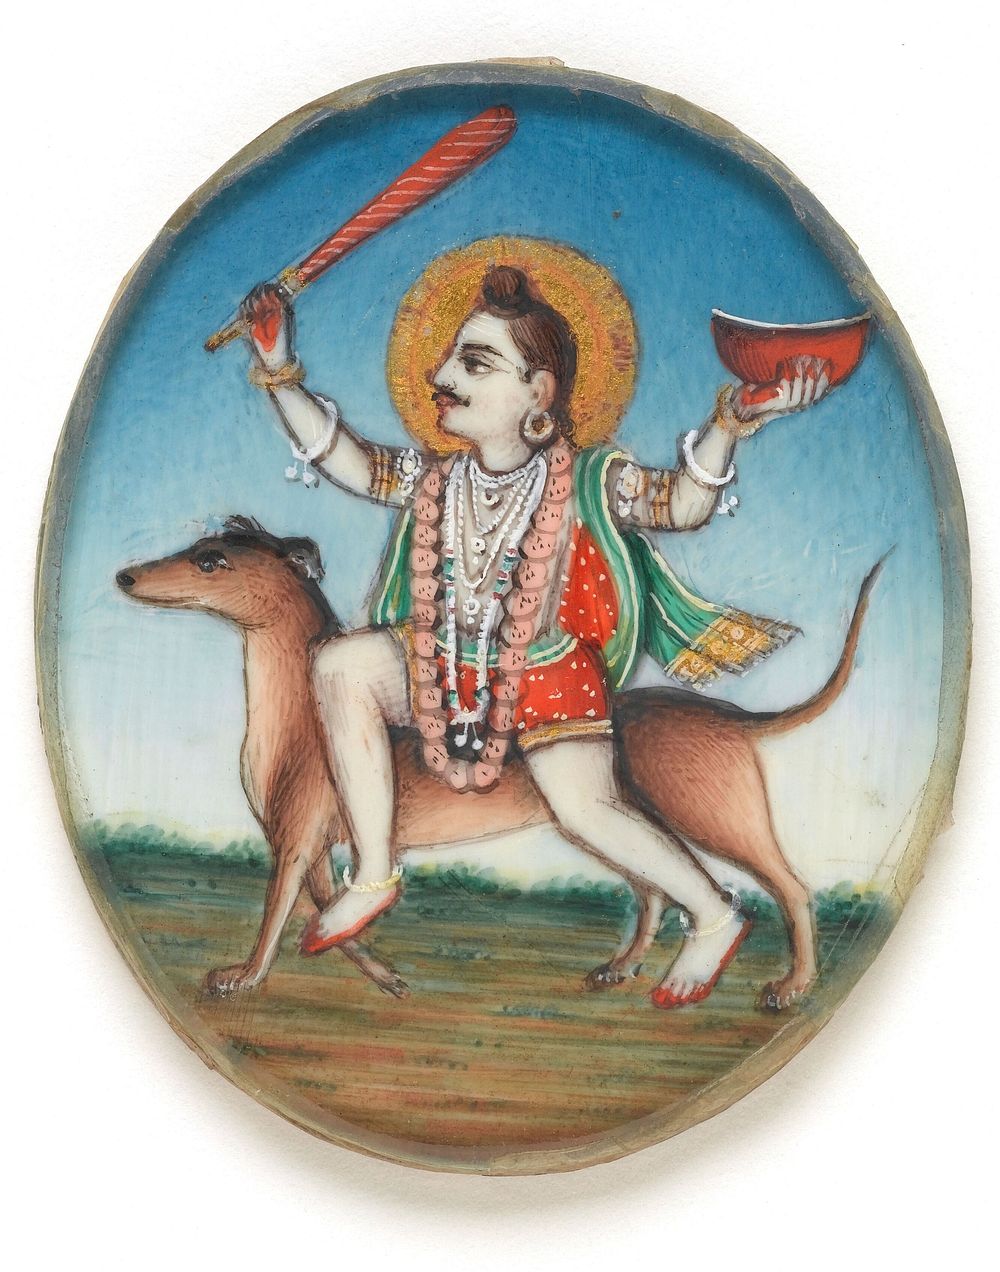 Lord Shiva as Bhairava, holding a club and a bowl, with his vehicle, a dog. Gouache painting by an Indian artist.